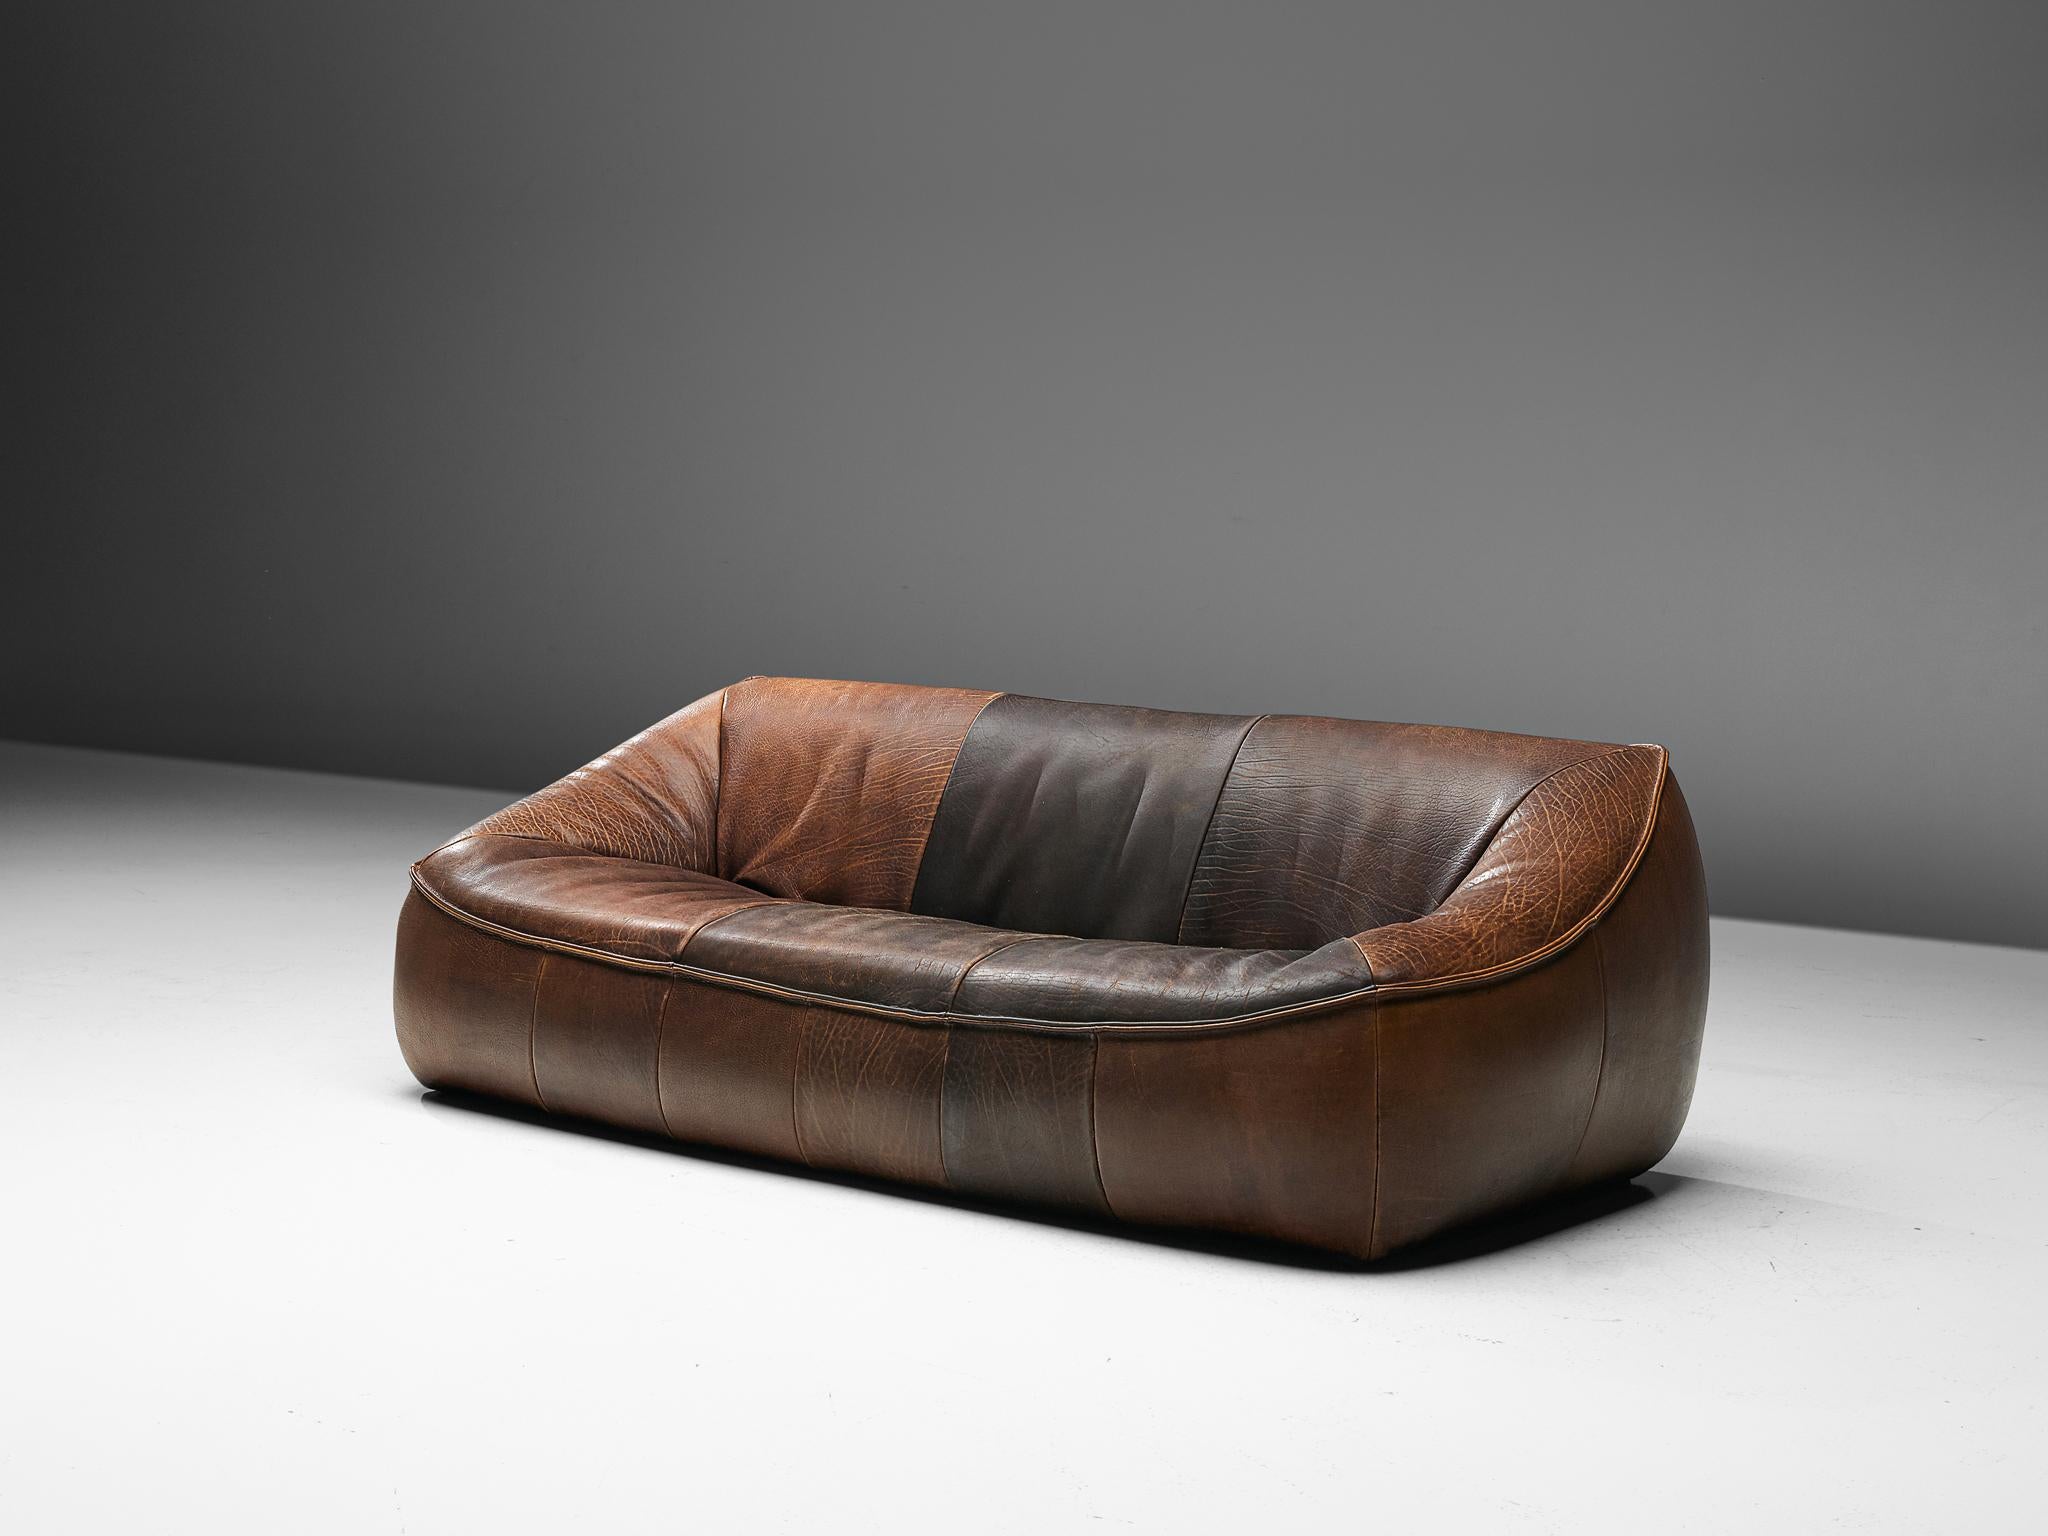 Gerard van den Berg 'Ringo' sofa for Montis, The Netherlands 1970s. 

Organic shaped sofa in brown De Sede quality leather. This sofa has an interesting design. It was designed as a large block of which the top is pressed inwards to create the